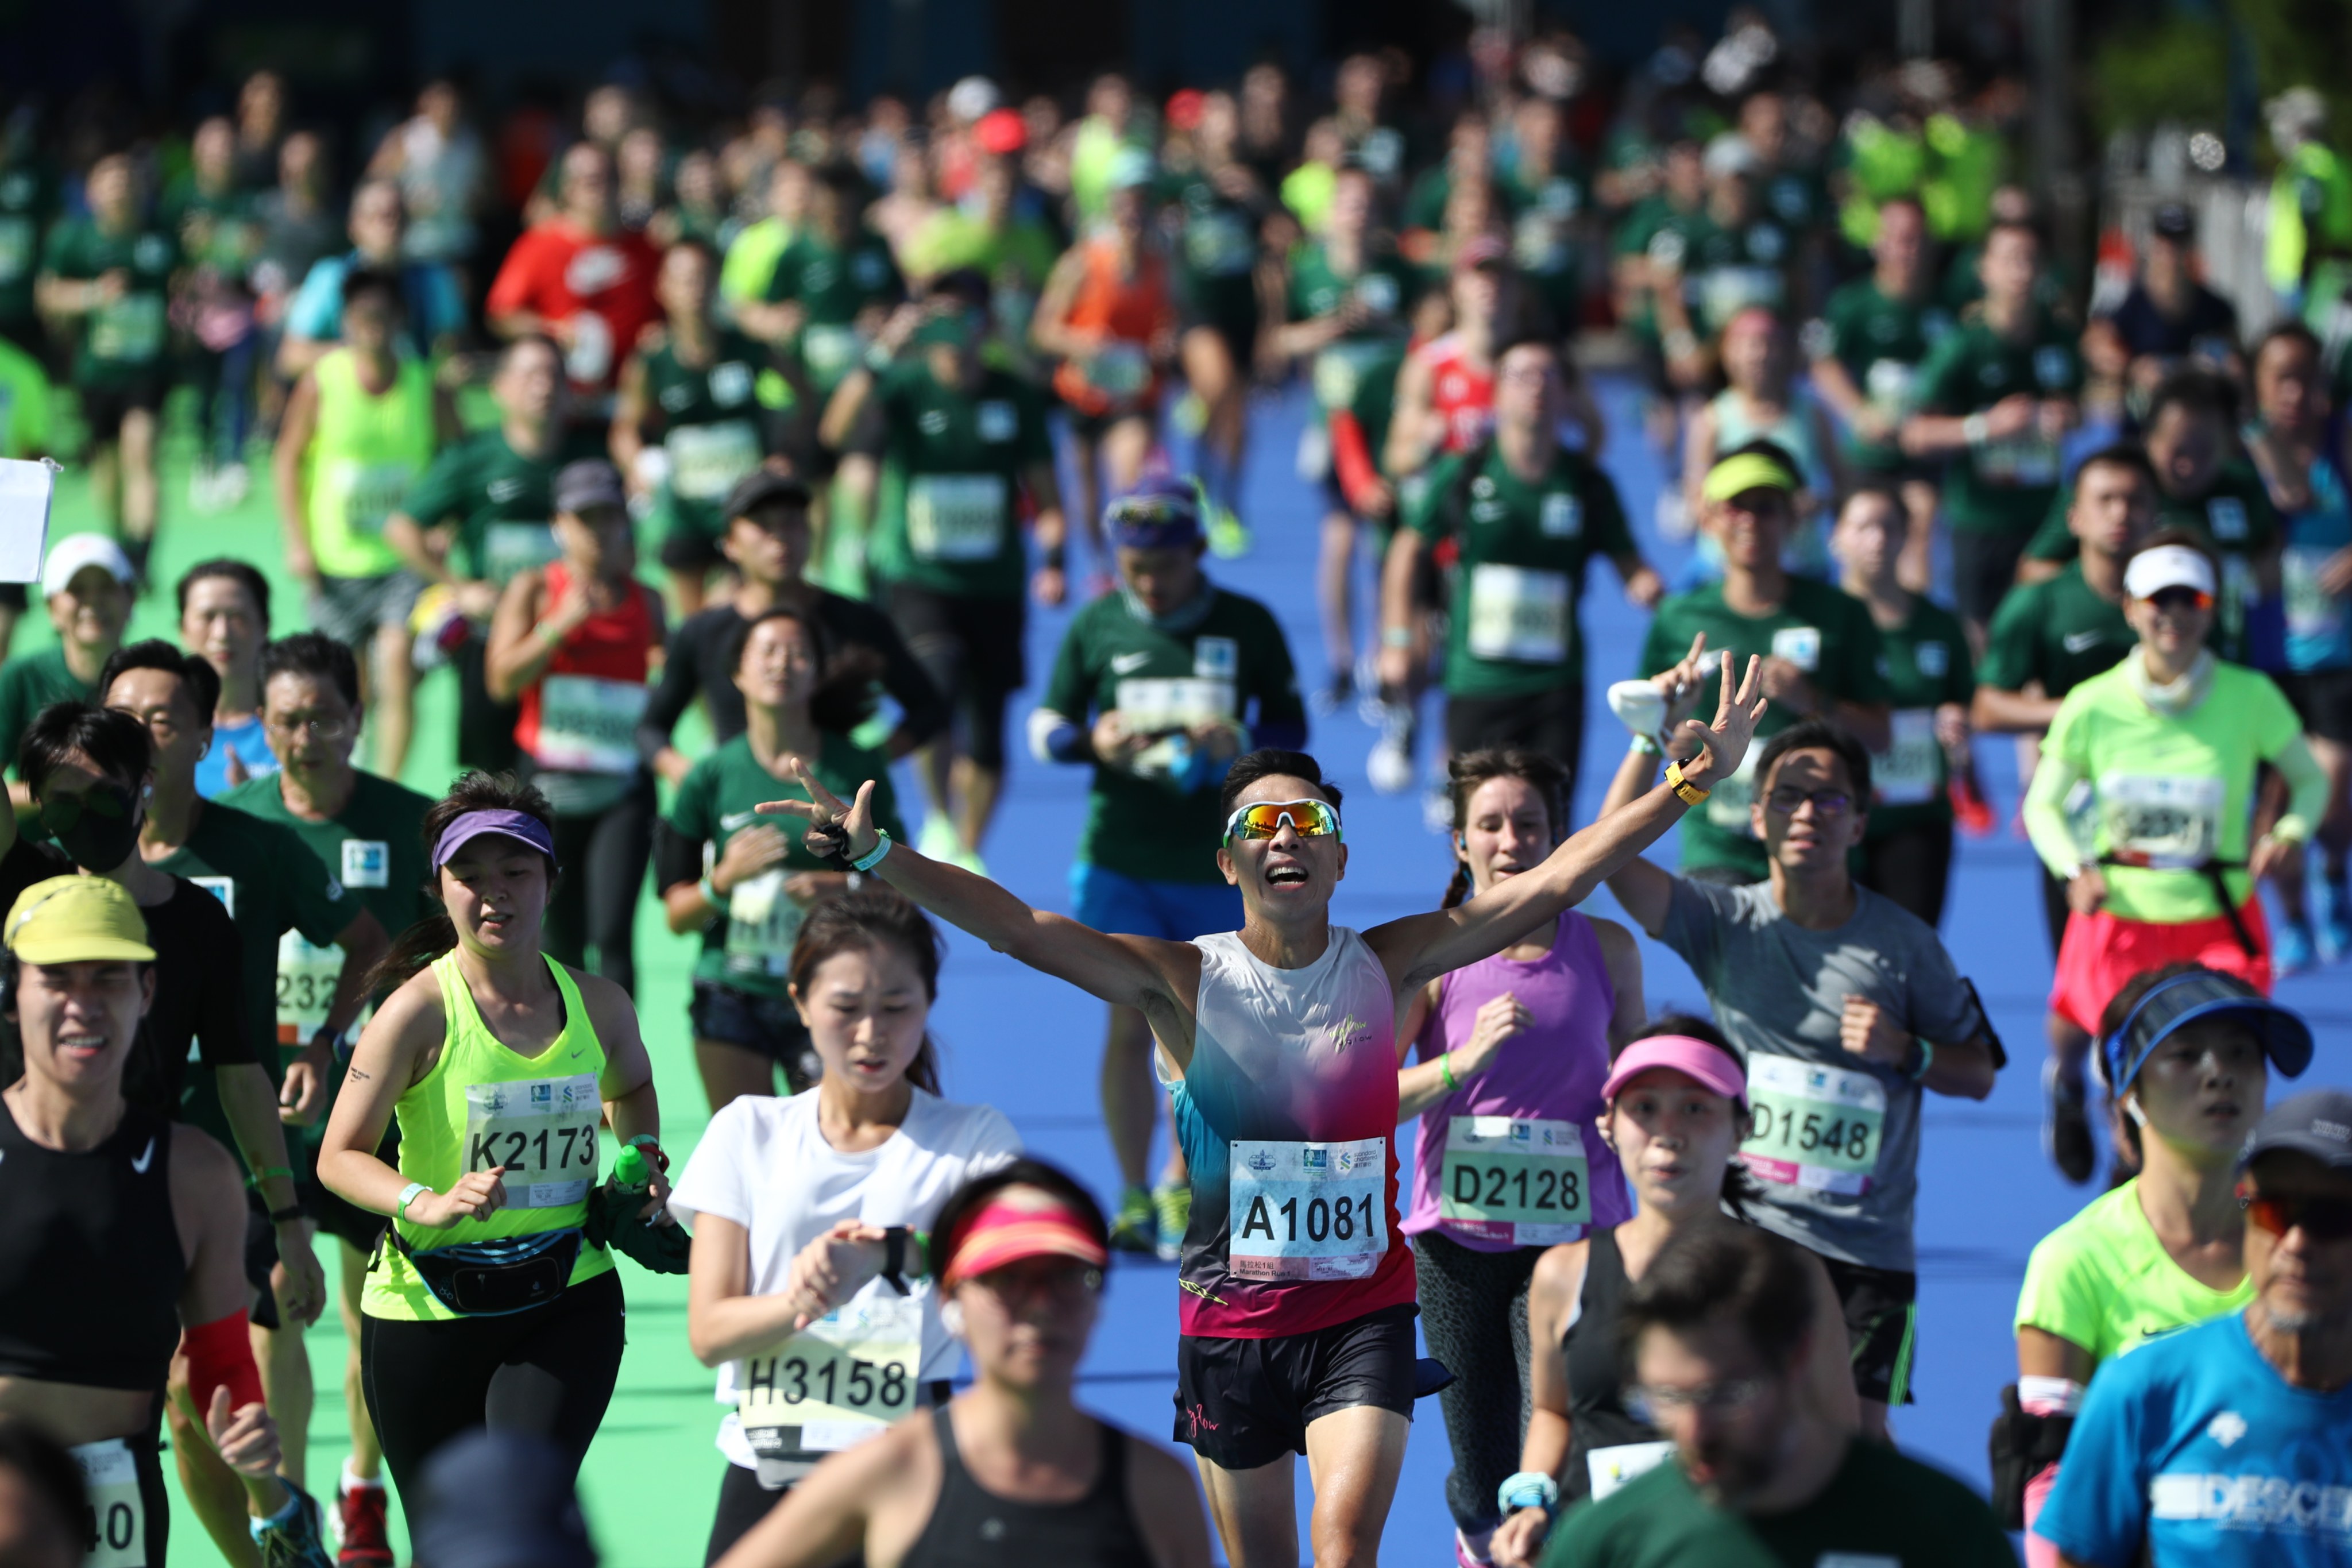 Runners arrive at the 2021 Standard Chartered Hong Kong Marathon finish line at Victoria Park. Photo: Nora Tam